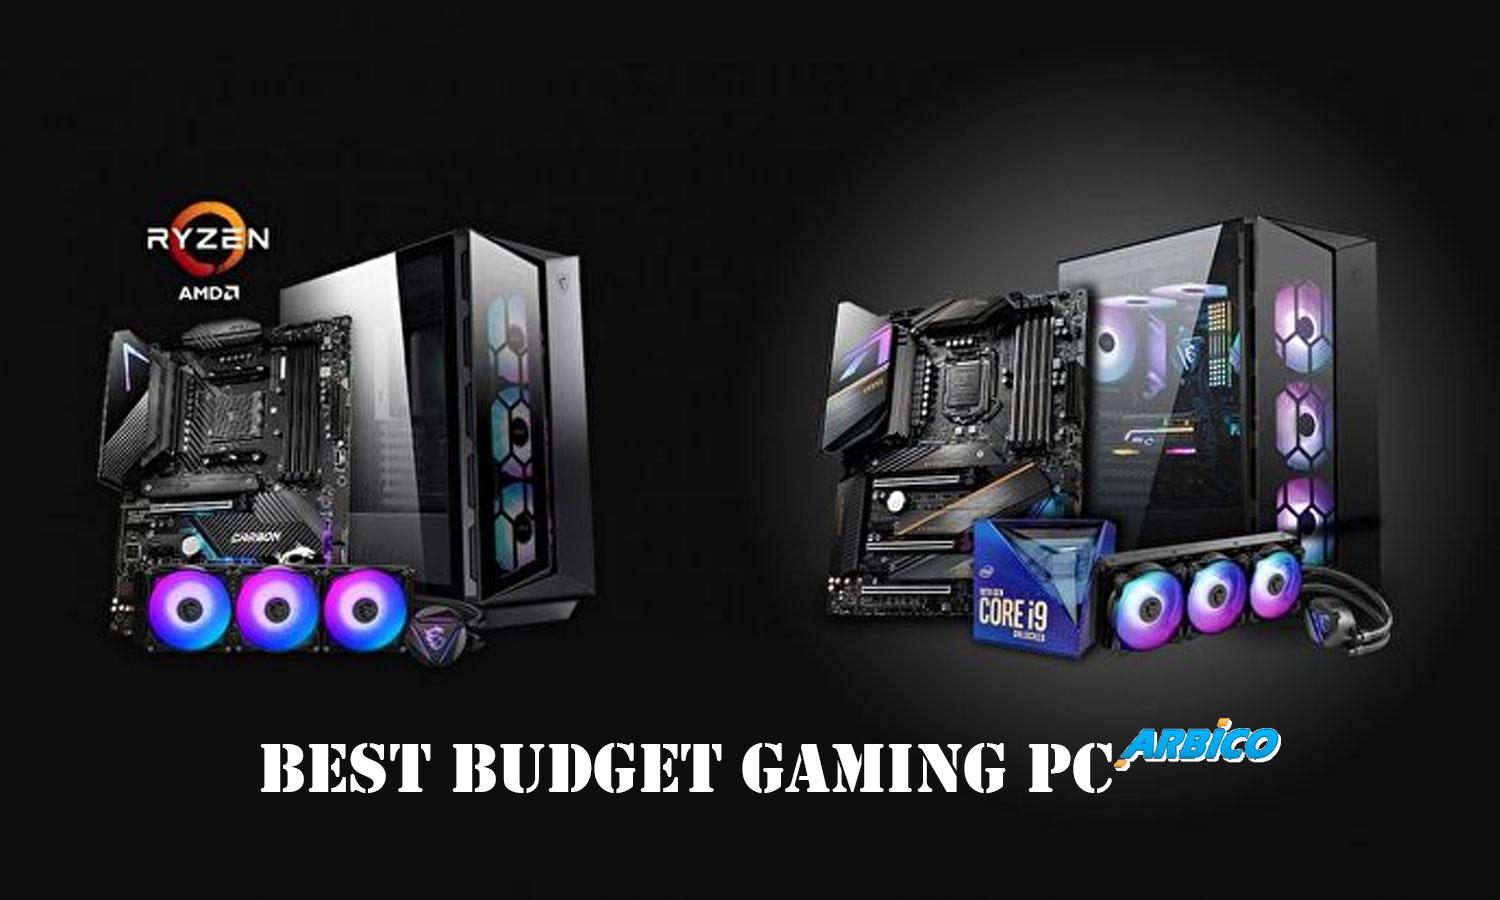 List Of Best Budget Gaming PC 2020